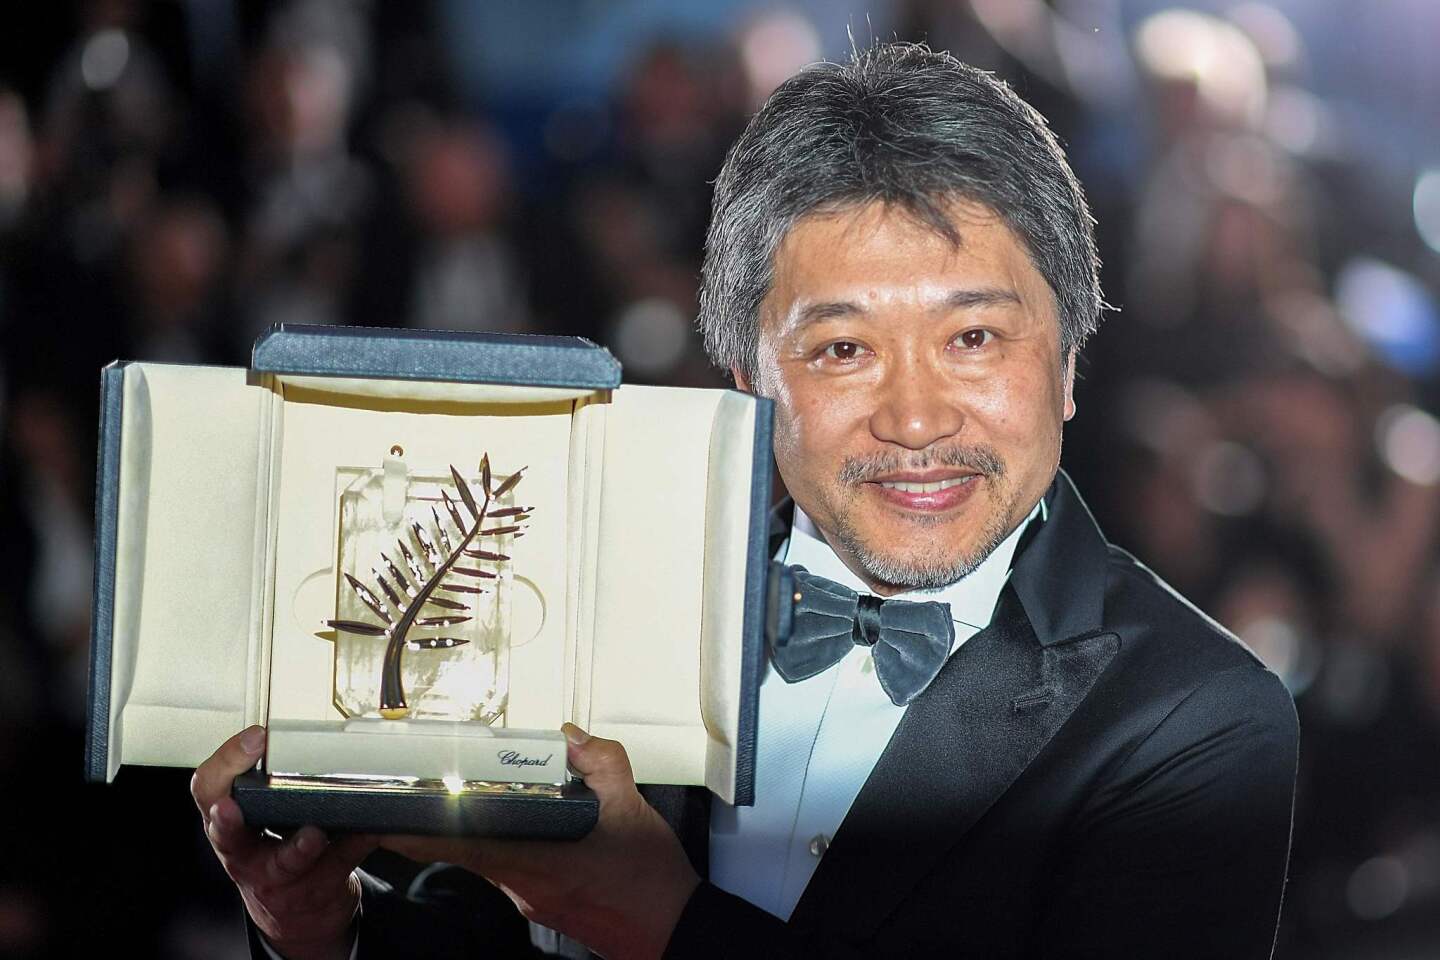 Japanese director Hirokazu Kore-Eda poses with his trophy during a photocall after he won the Palme d'Or for the film "Shoplifters (Manbiki Kazoku)" at the 71st edition of the Cannes Film Festival.